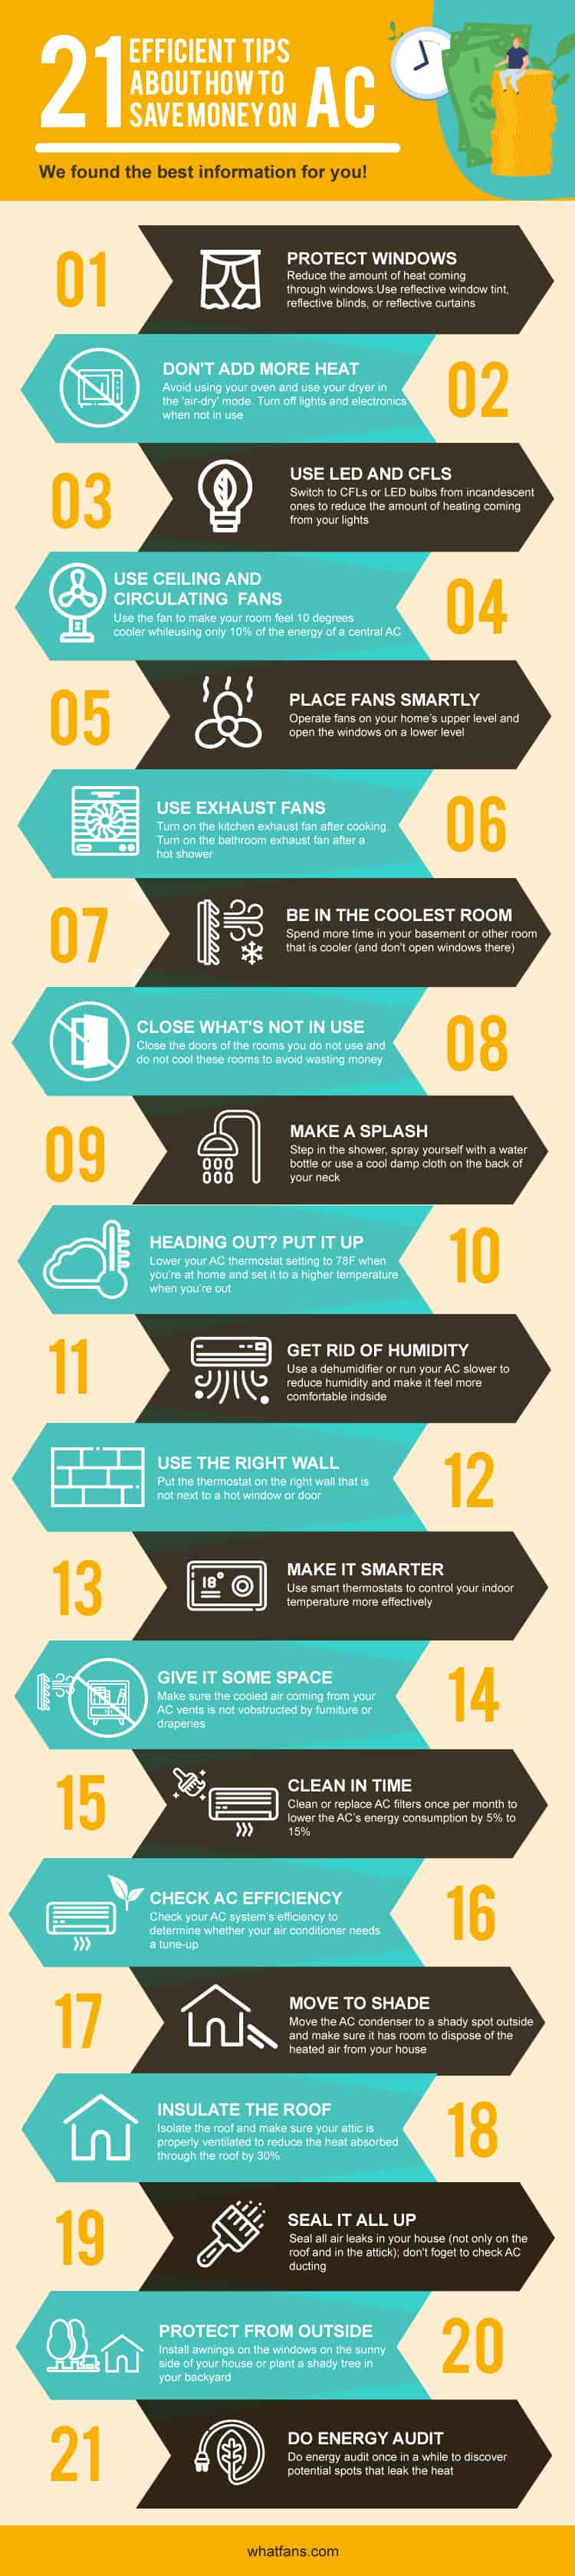 21 efficient tips about how to save money on AC infographic #energysaving #savingmoney #summertips #energysavingtips #coolingtips #homeimprovement #airconditioning #fan #fans #whatfans #Infographic